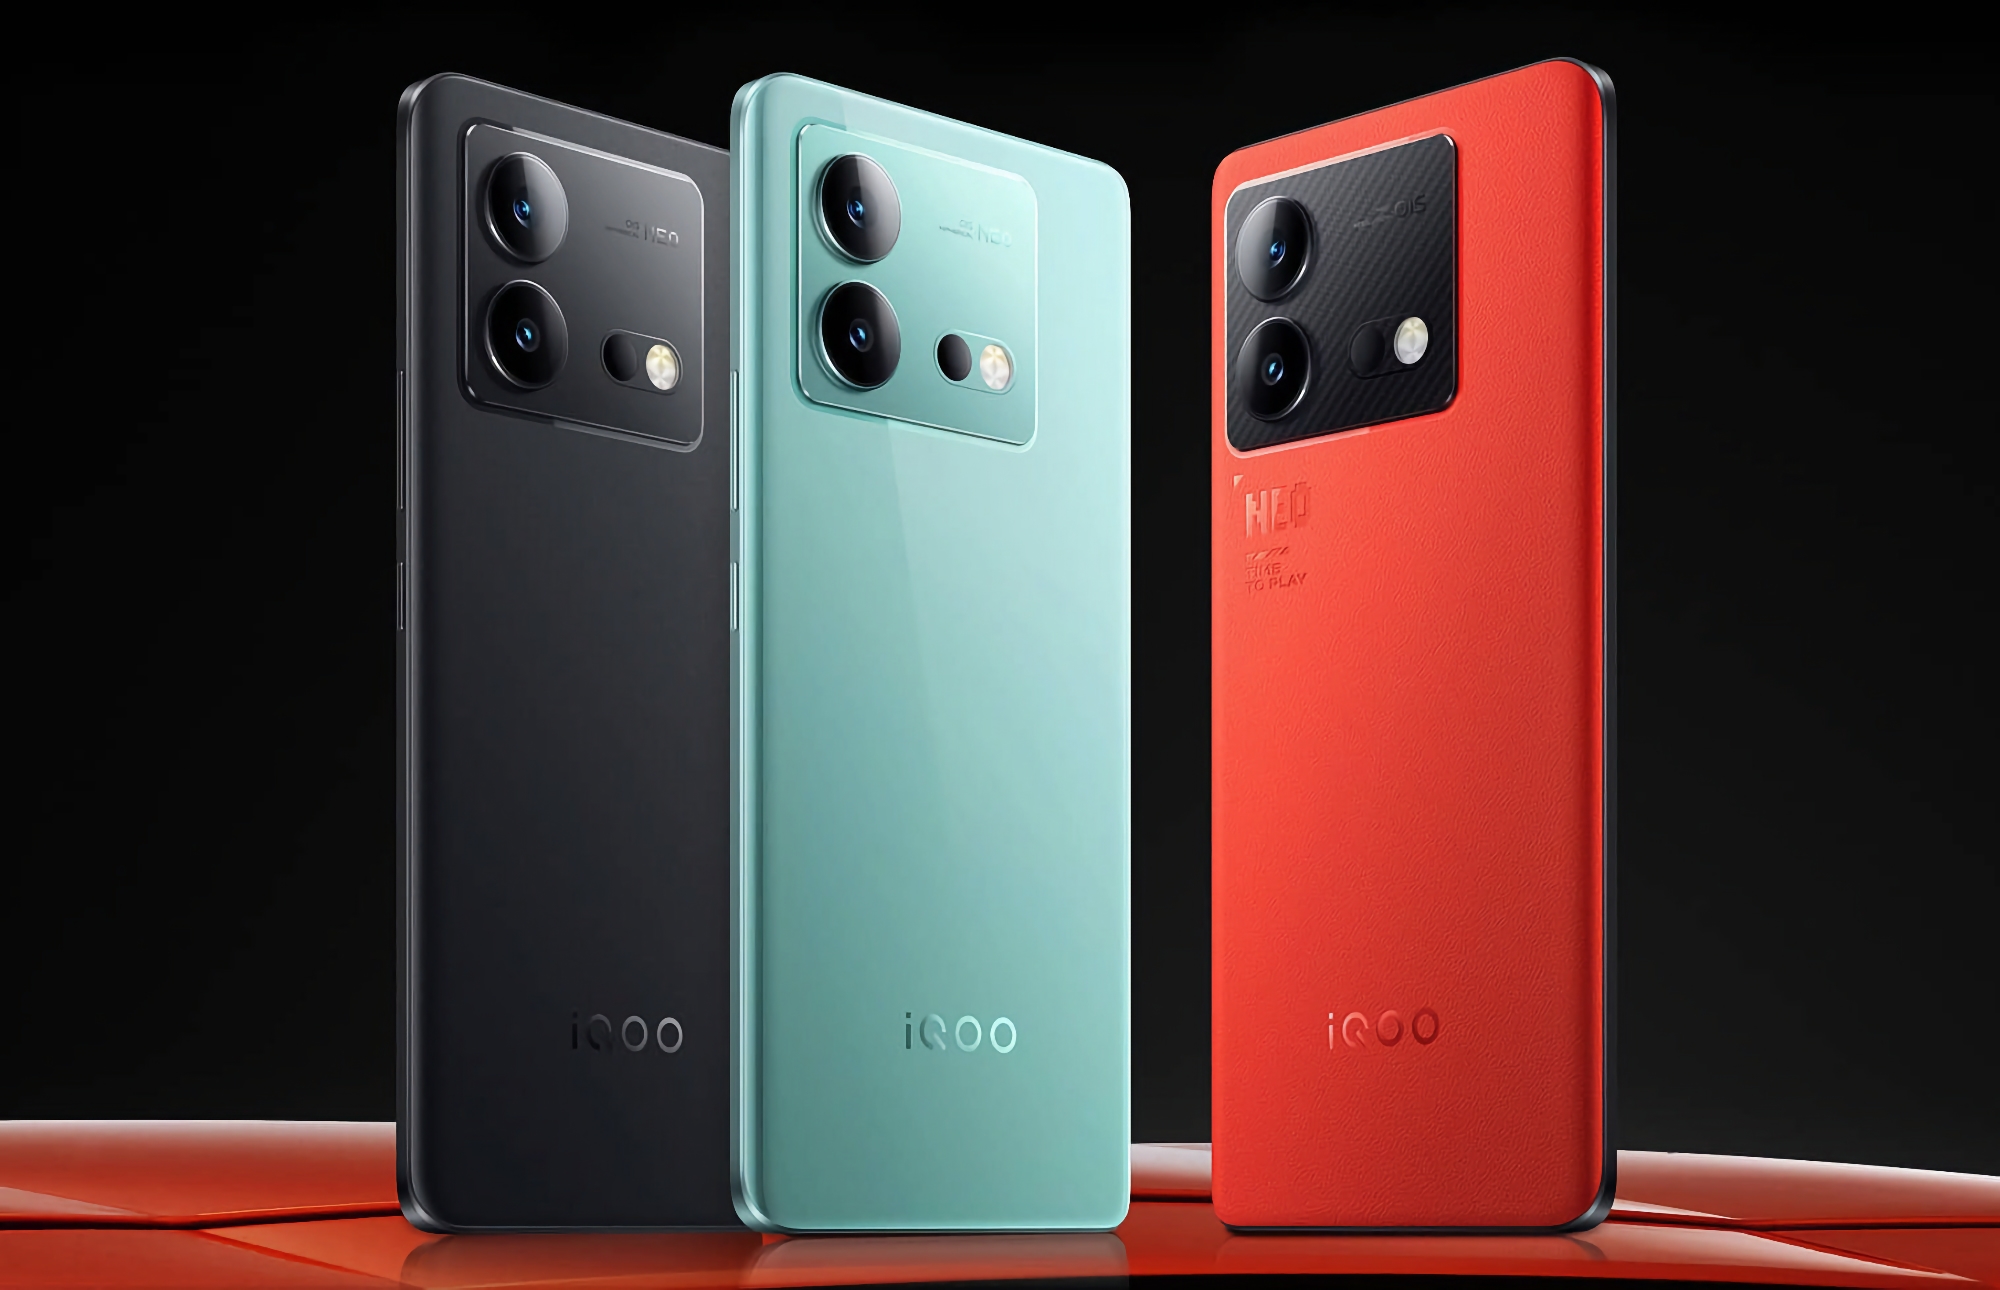 How much will the iQOO Neo 7 Pro with 144Hz screen and Snapdragon 8+ Gen 1 chip cost